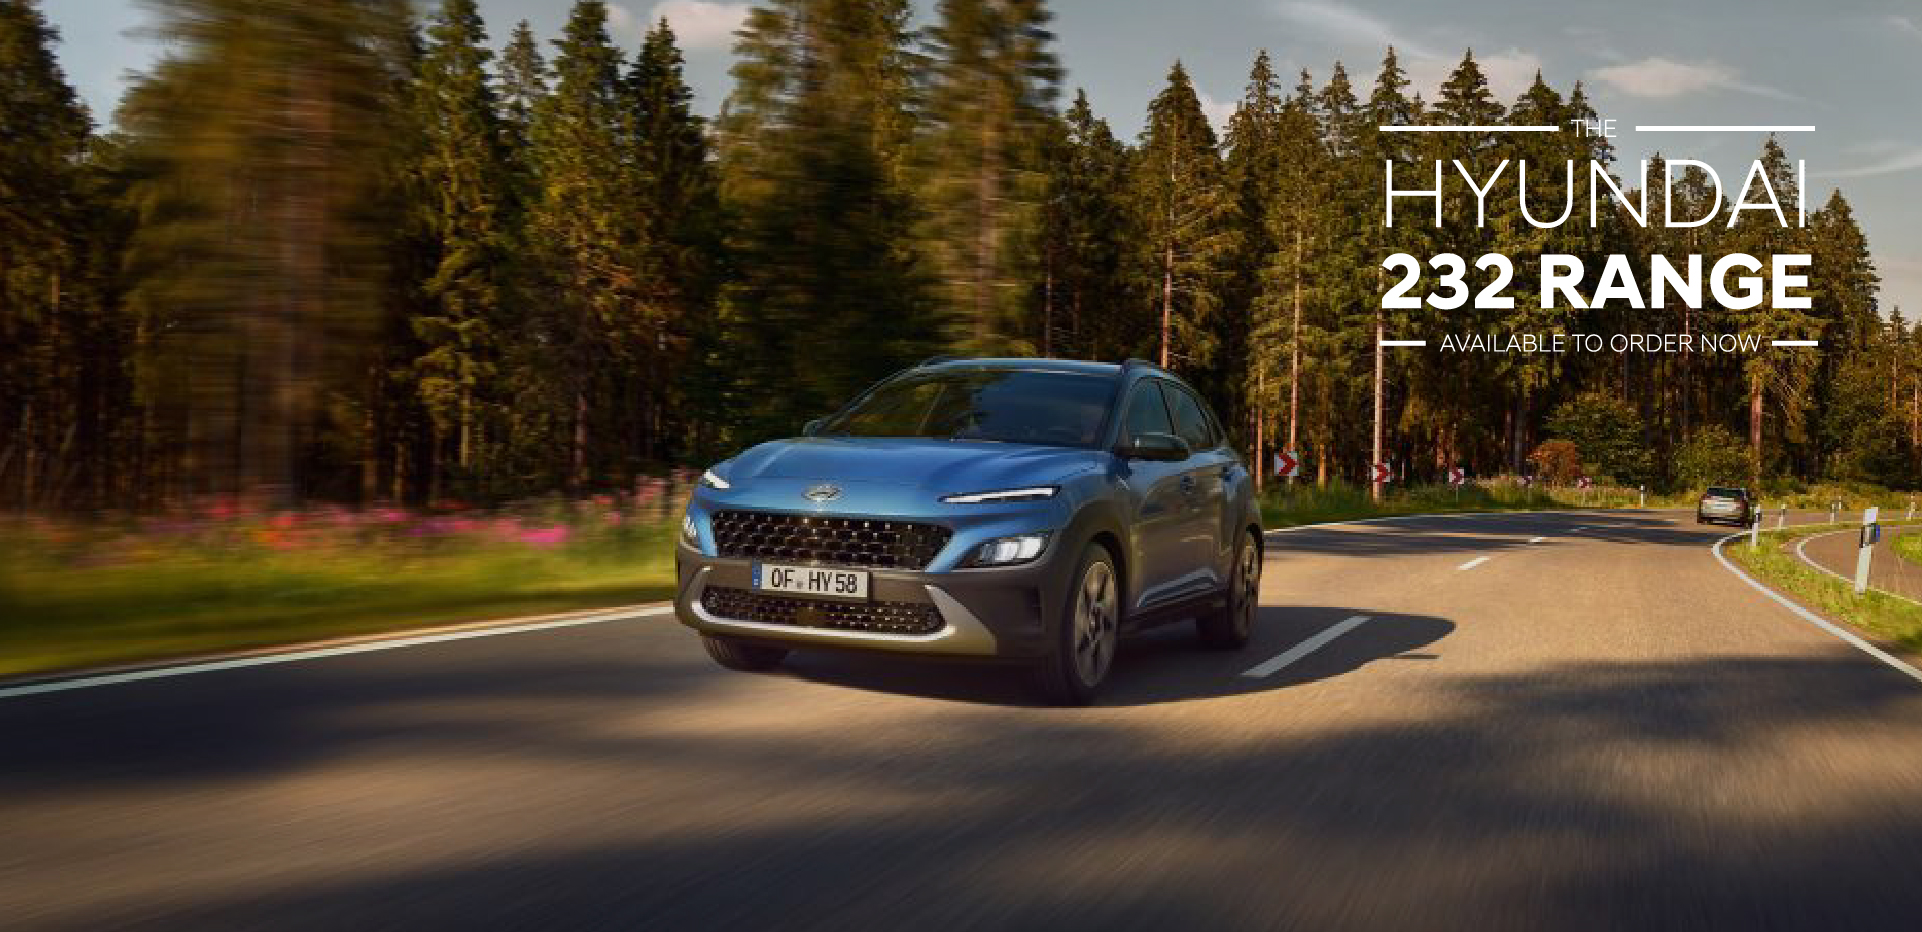 The new Hyundai Kona from the front in Surfy Blue driving down a forest road.